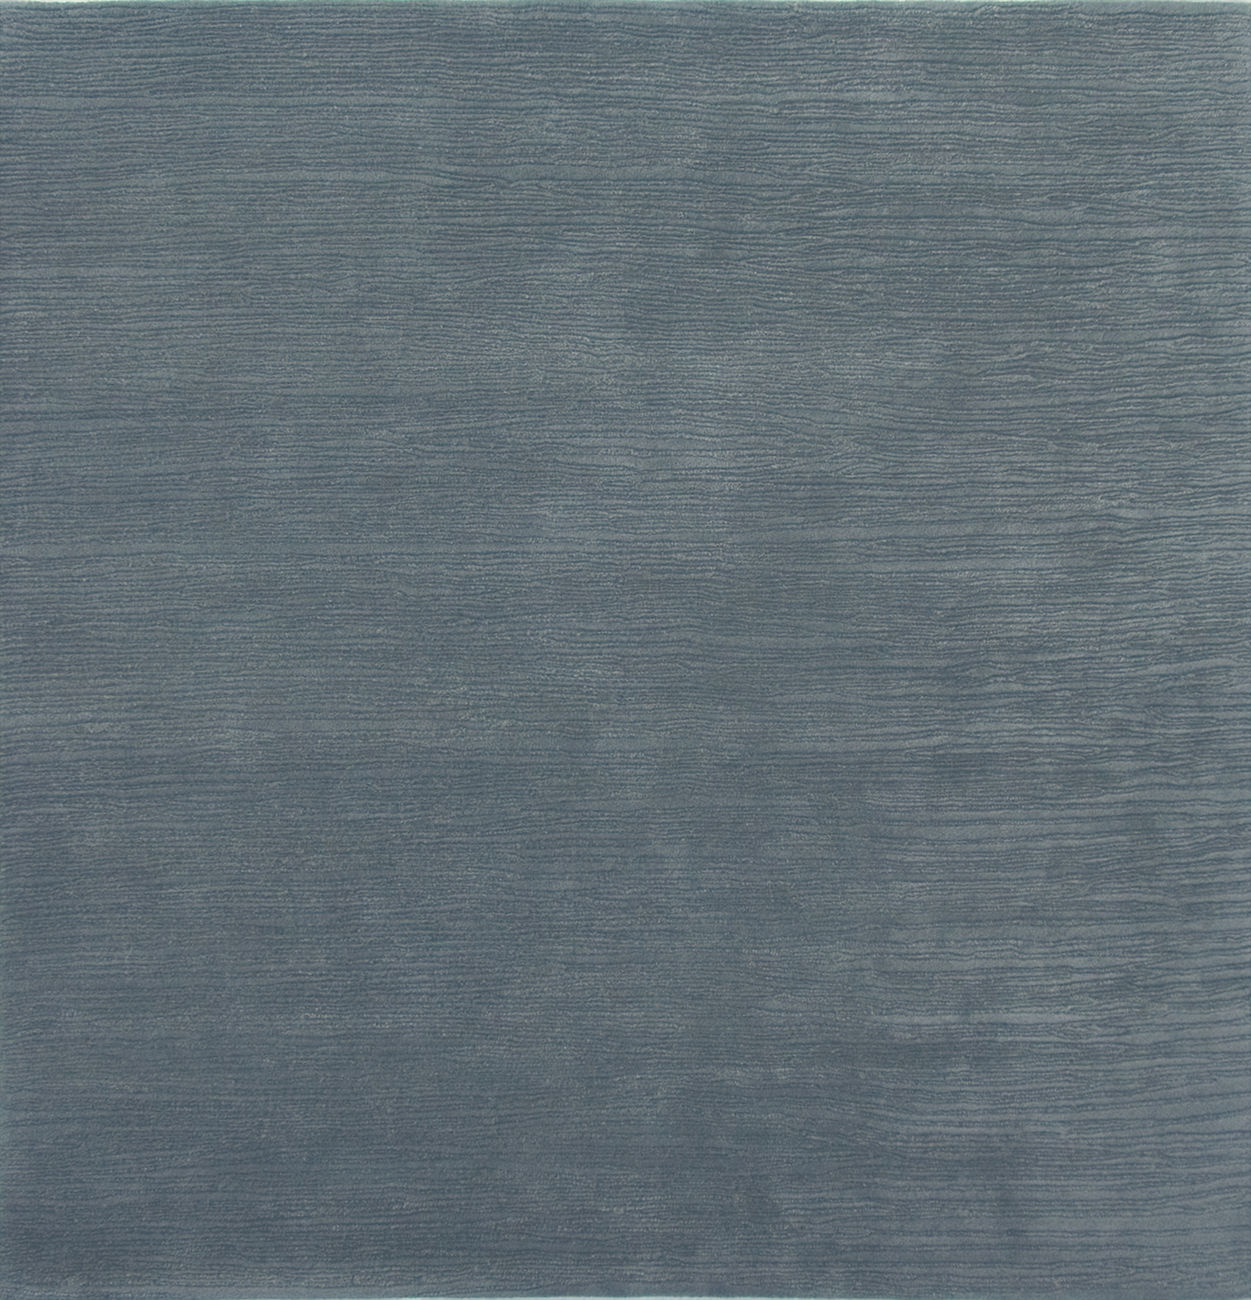 Blue Solid Shore Wool Rug Product Image